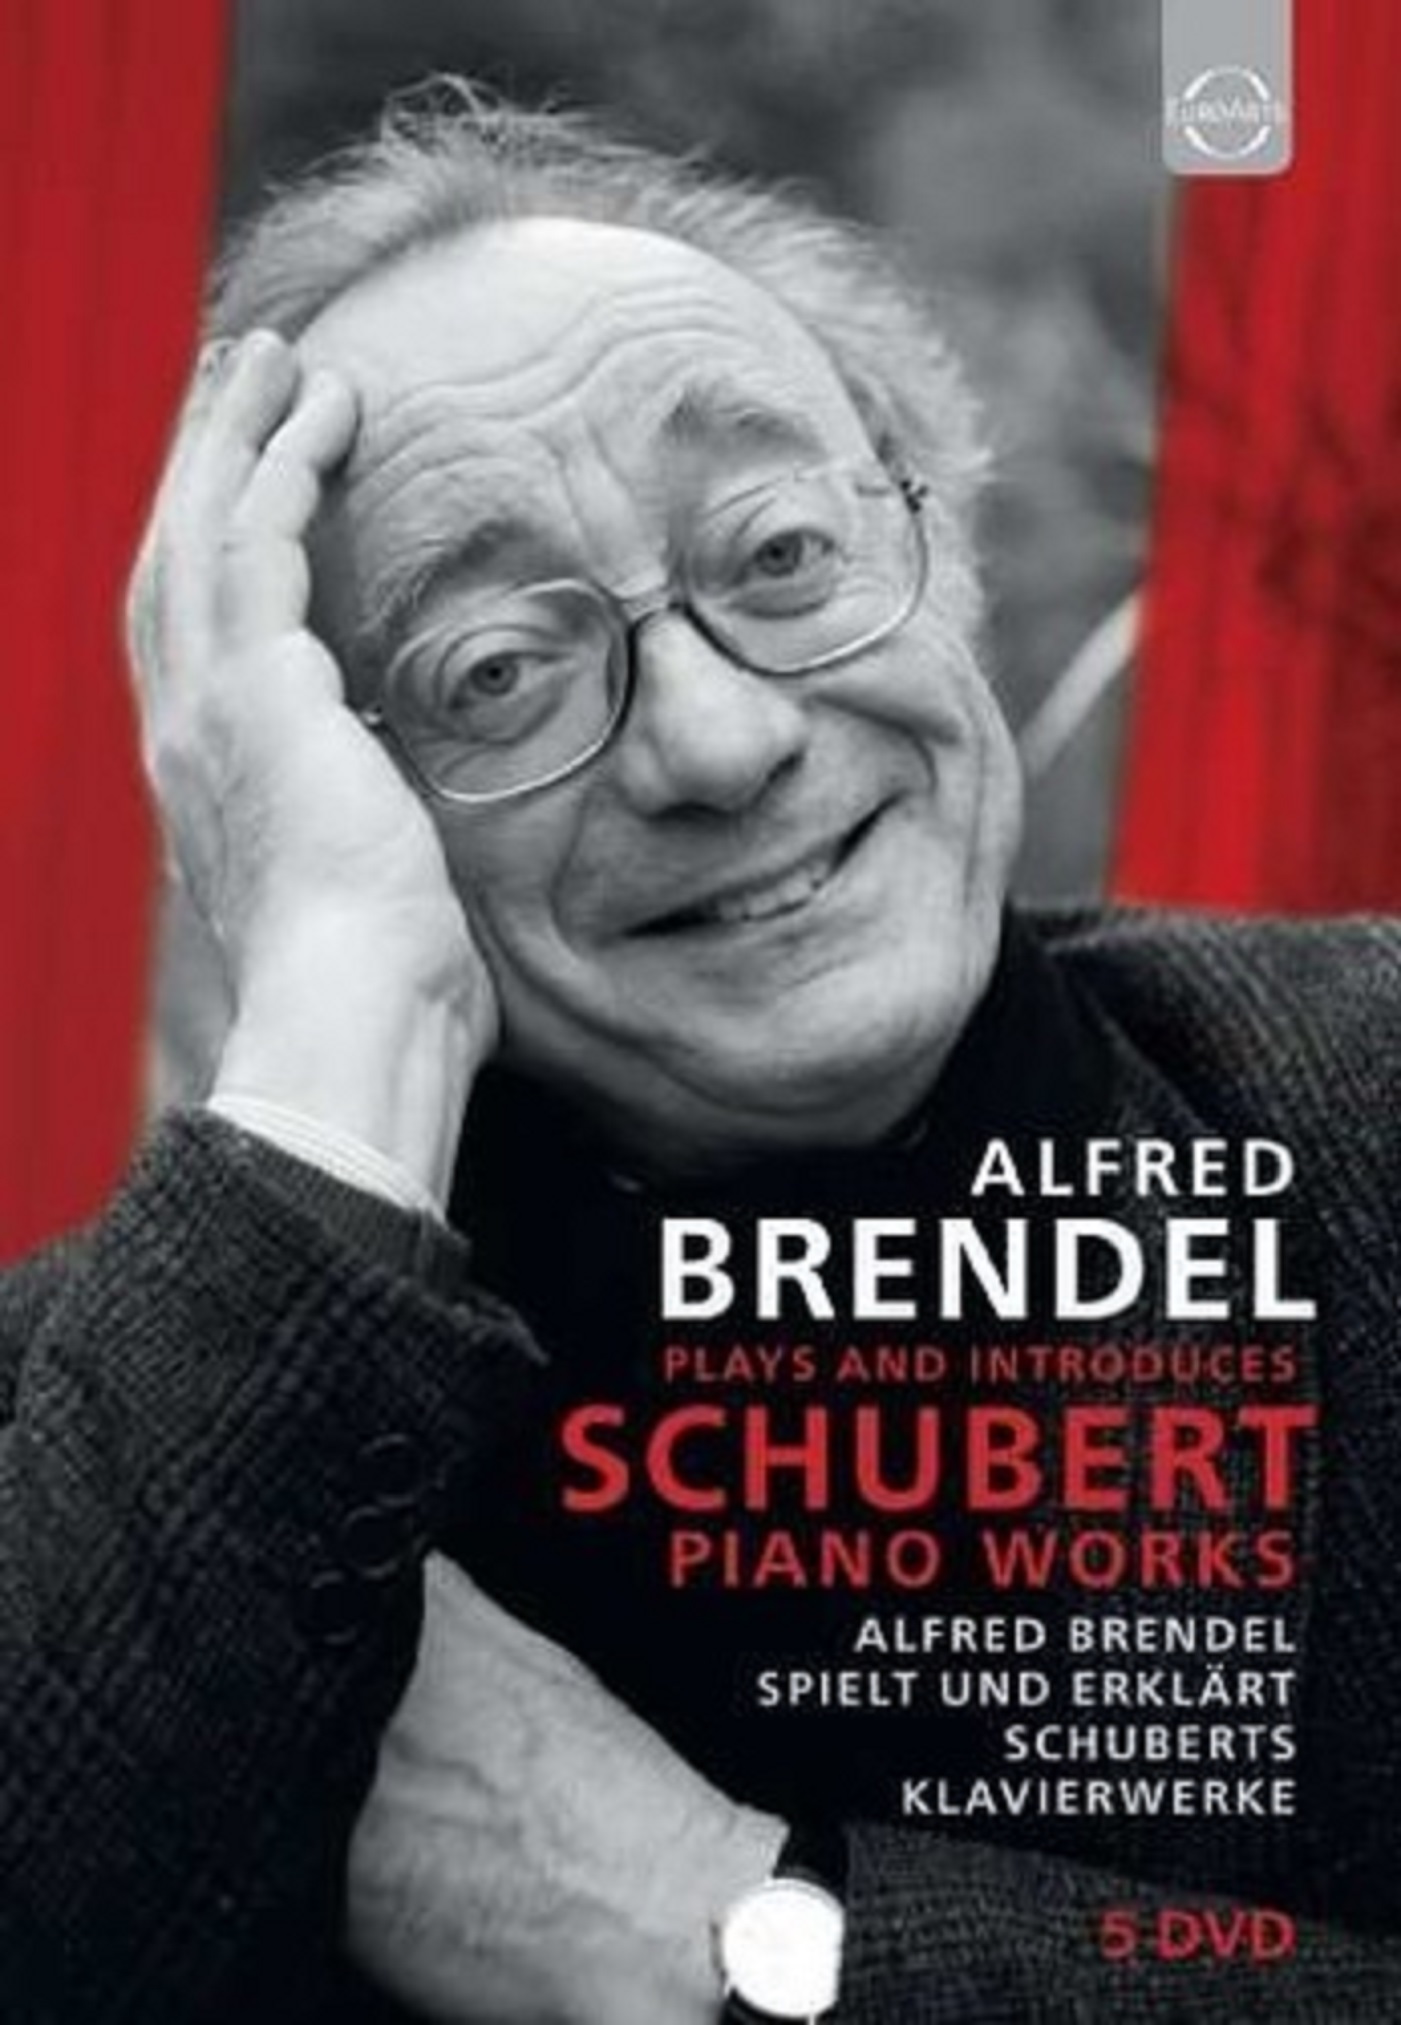 Plays And Introduces Schubert Piano Works - DVD | Alfred Brendel